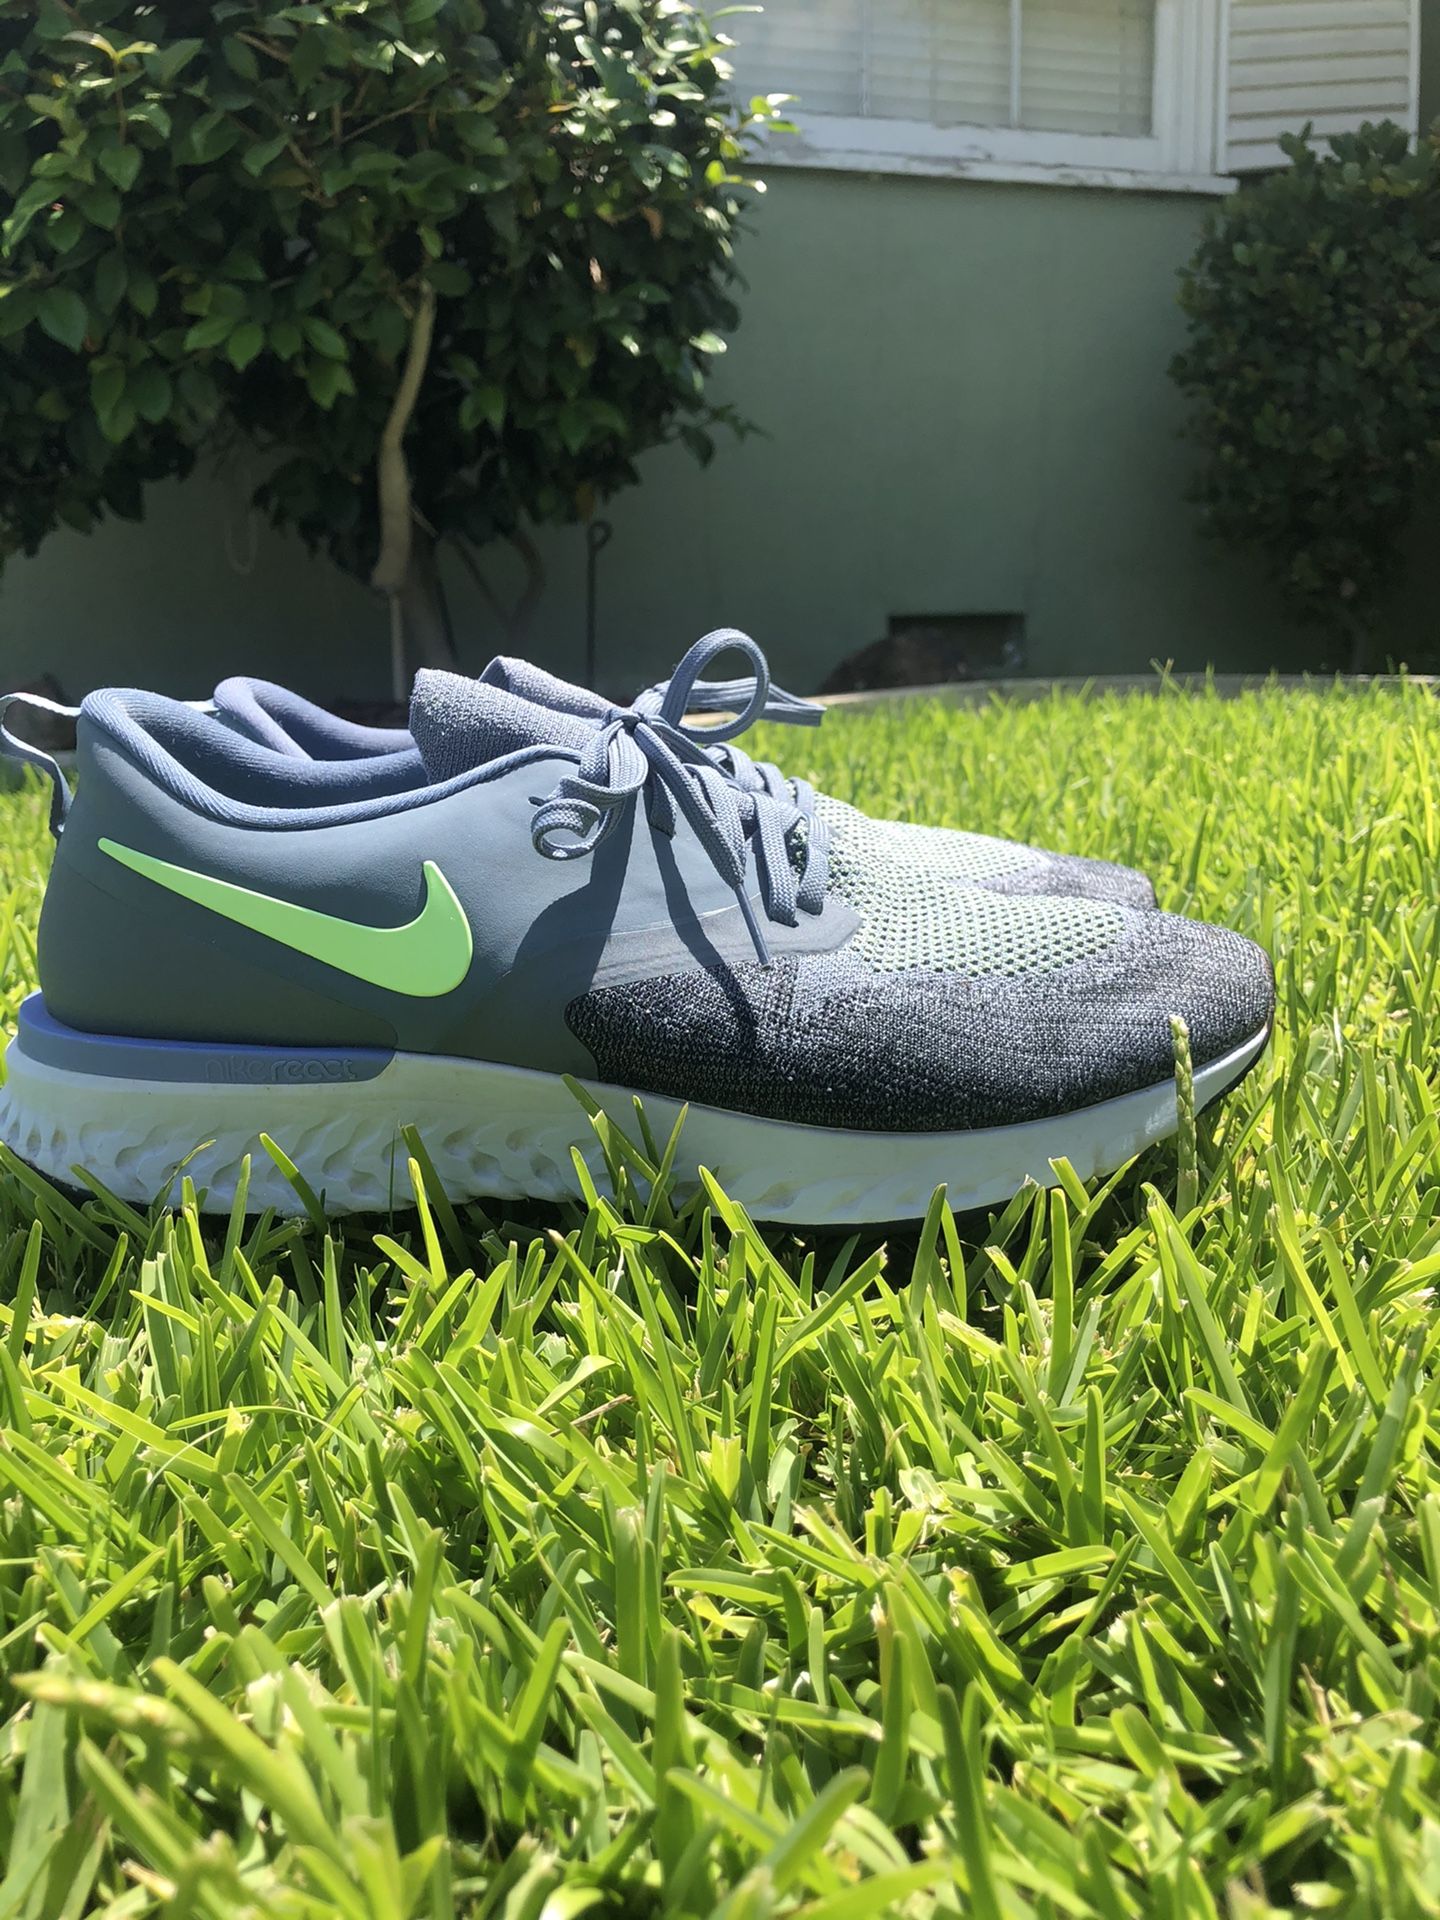 Nike odyssey react flyknit 2 running shoes